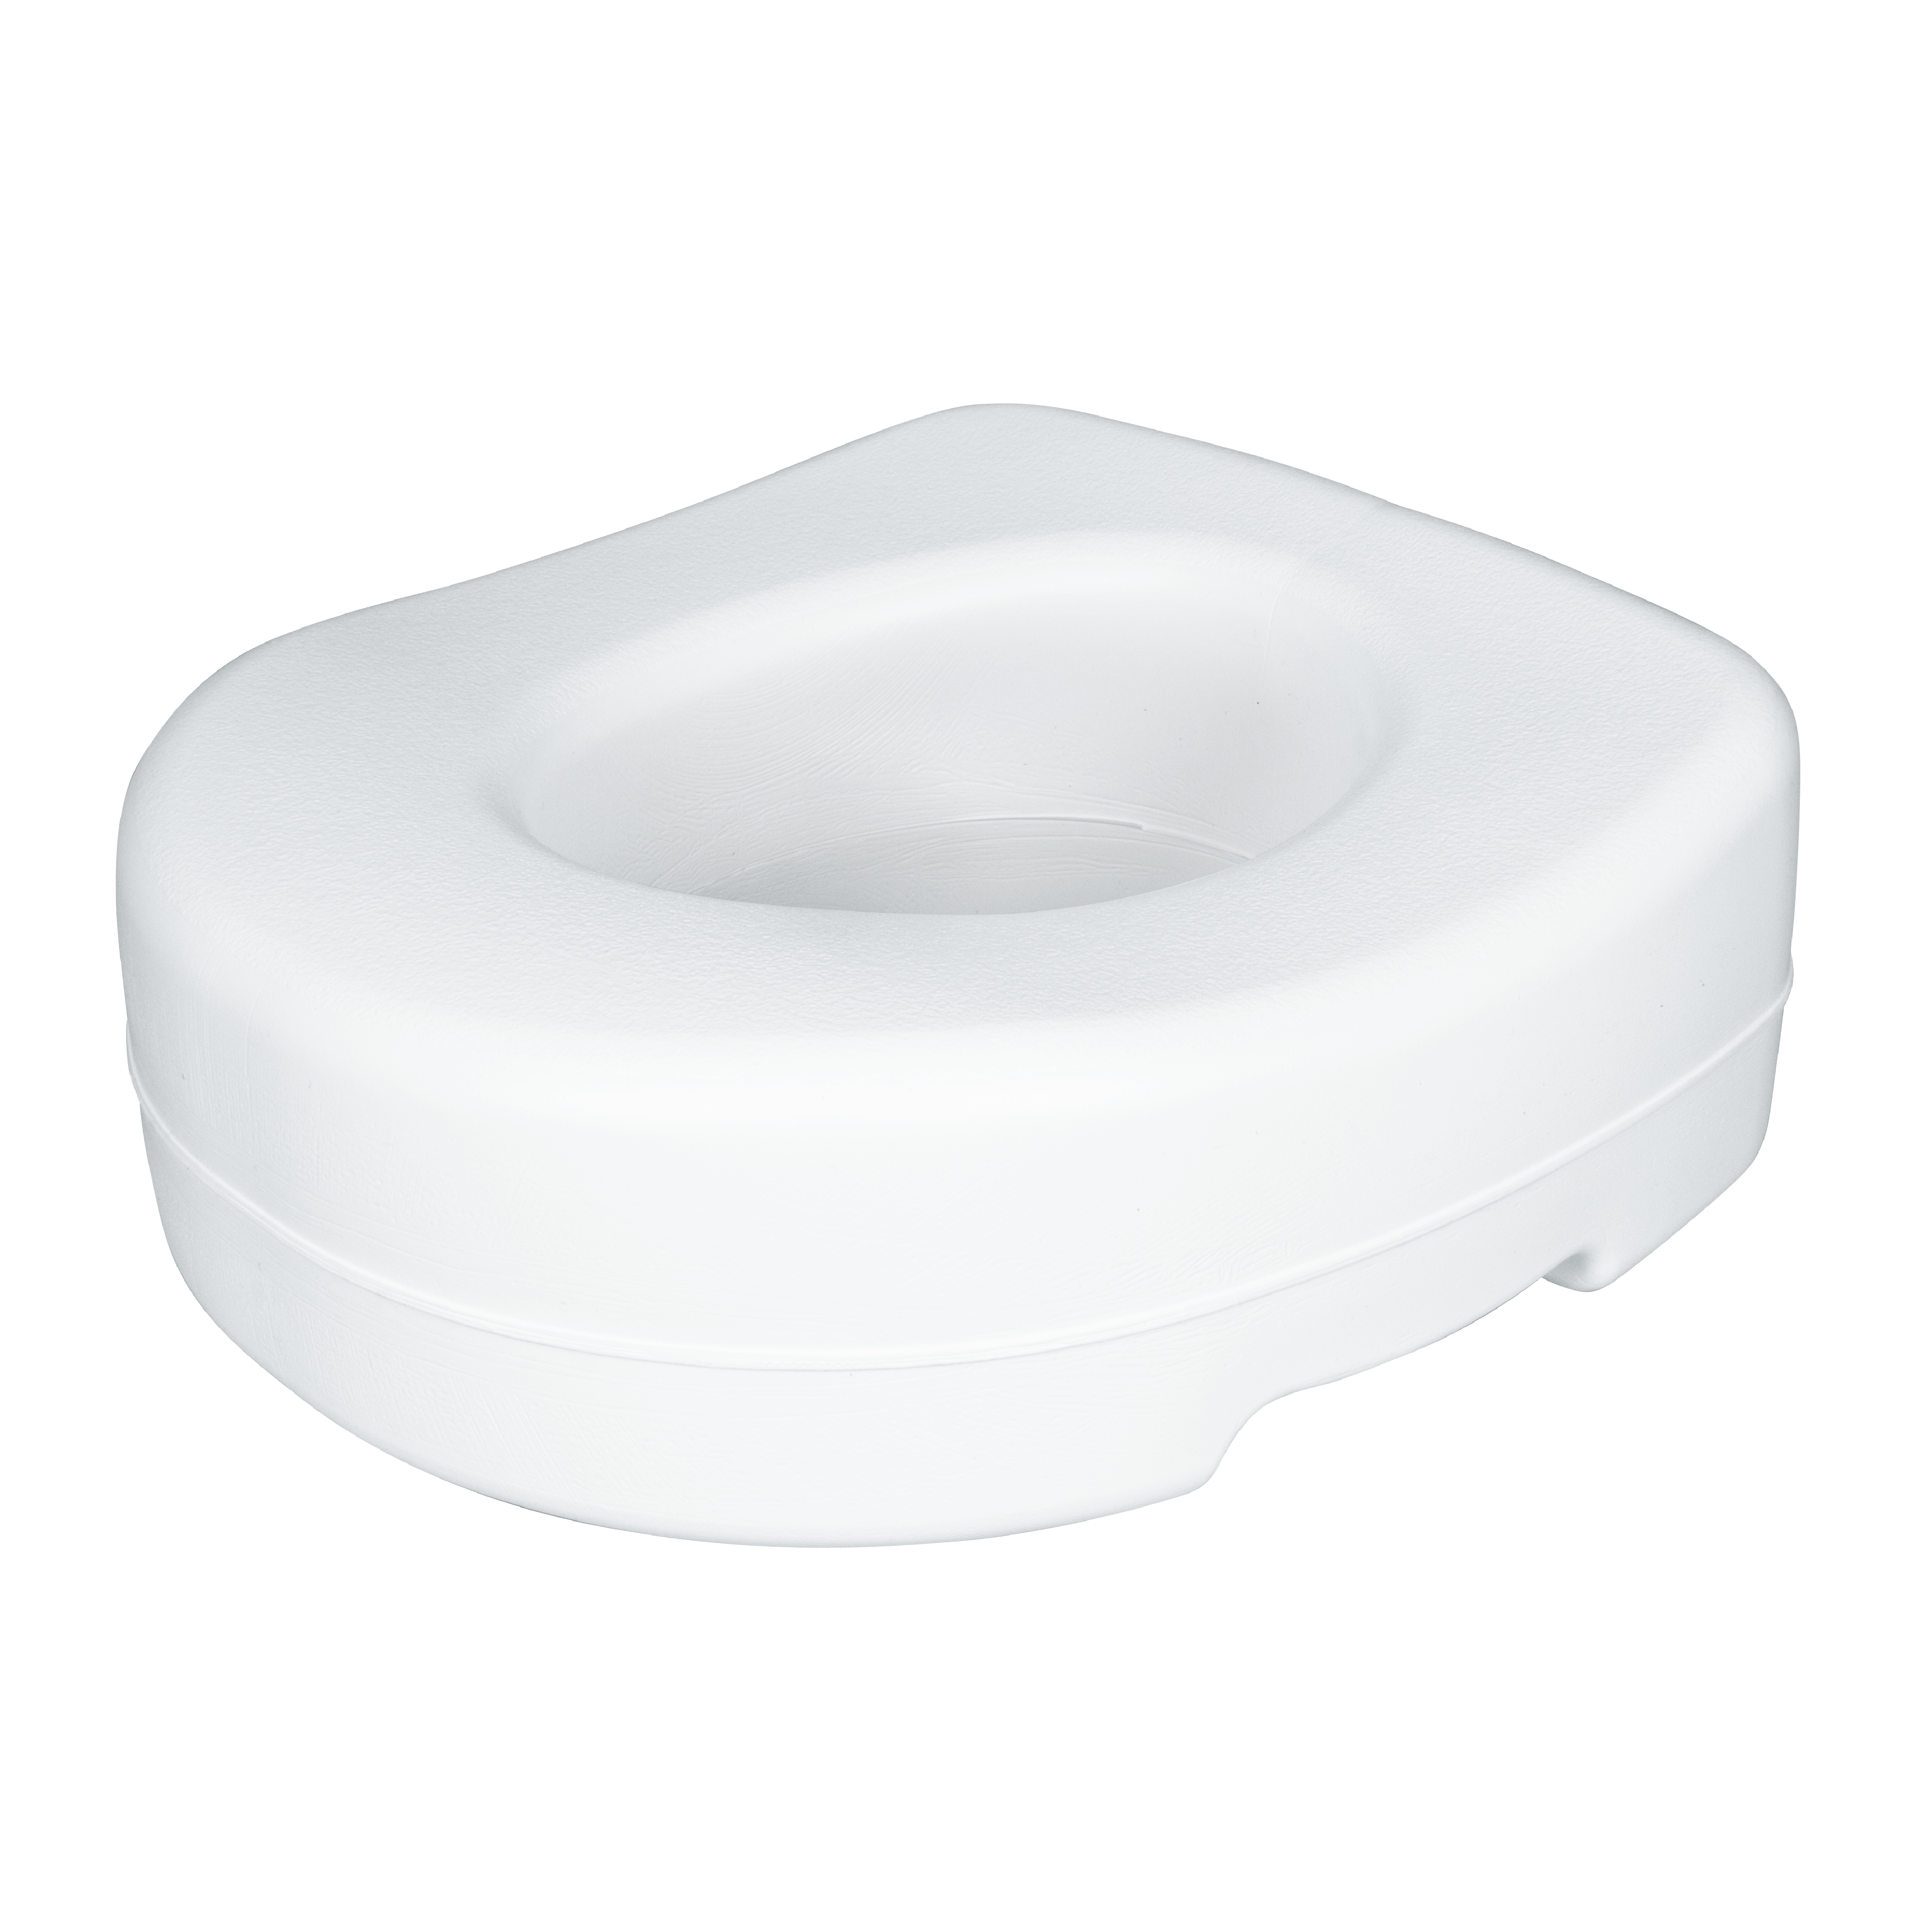 Carex Raised Toilet Seat with Rubber Pads - Carex Health Brands